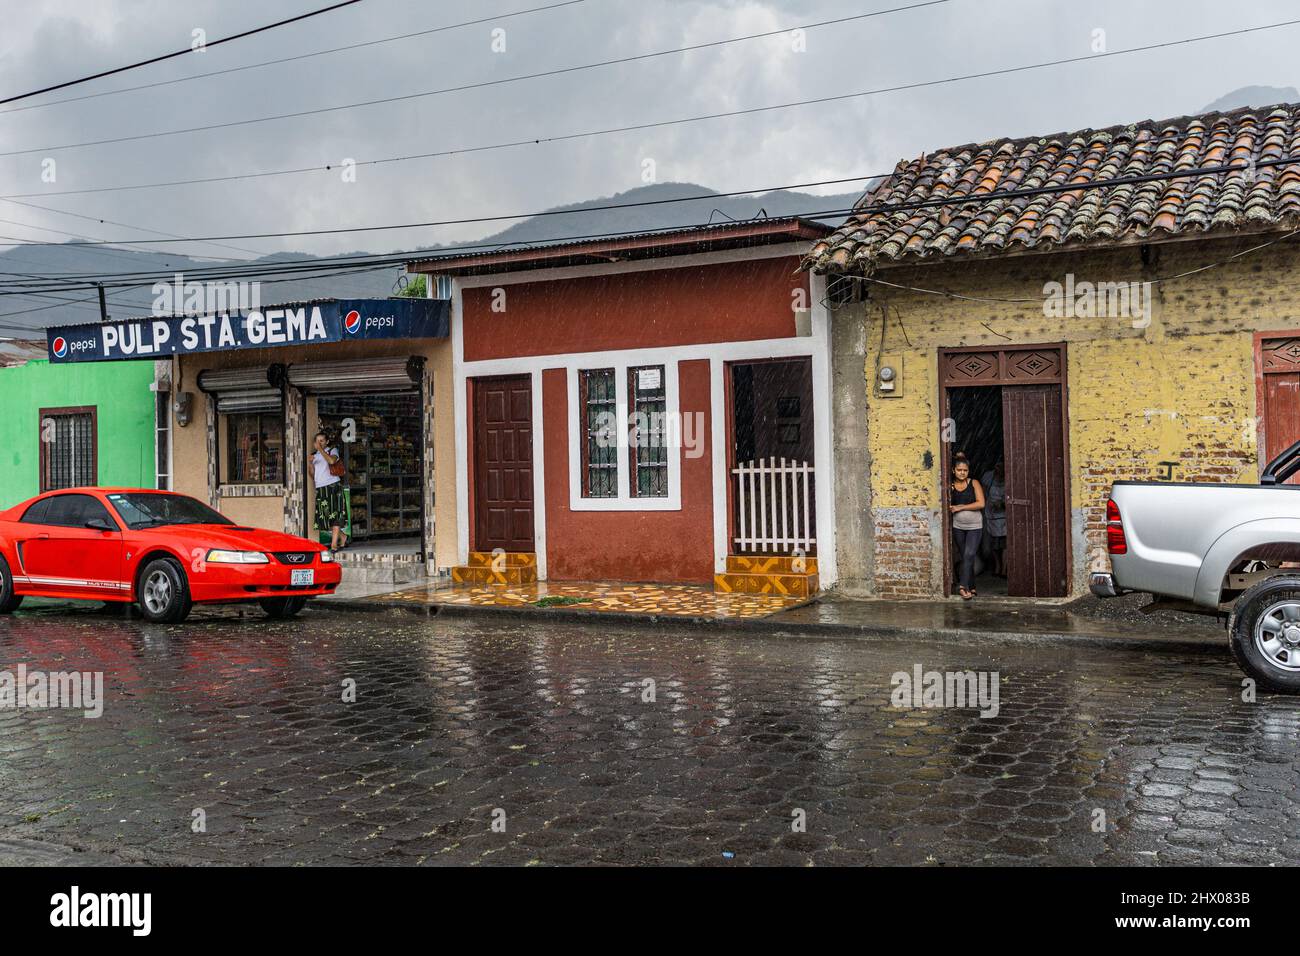 Women shop keepers watch the rain in Jinotega, Nicaragua.  Red Mustang in front of one store. Stock Photo